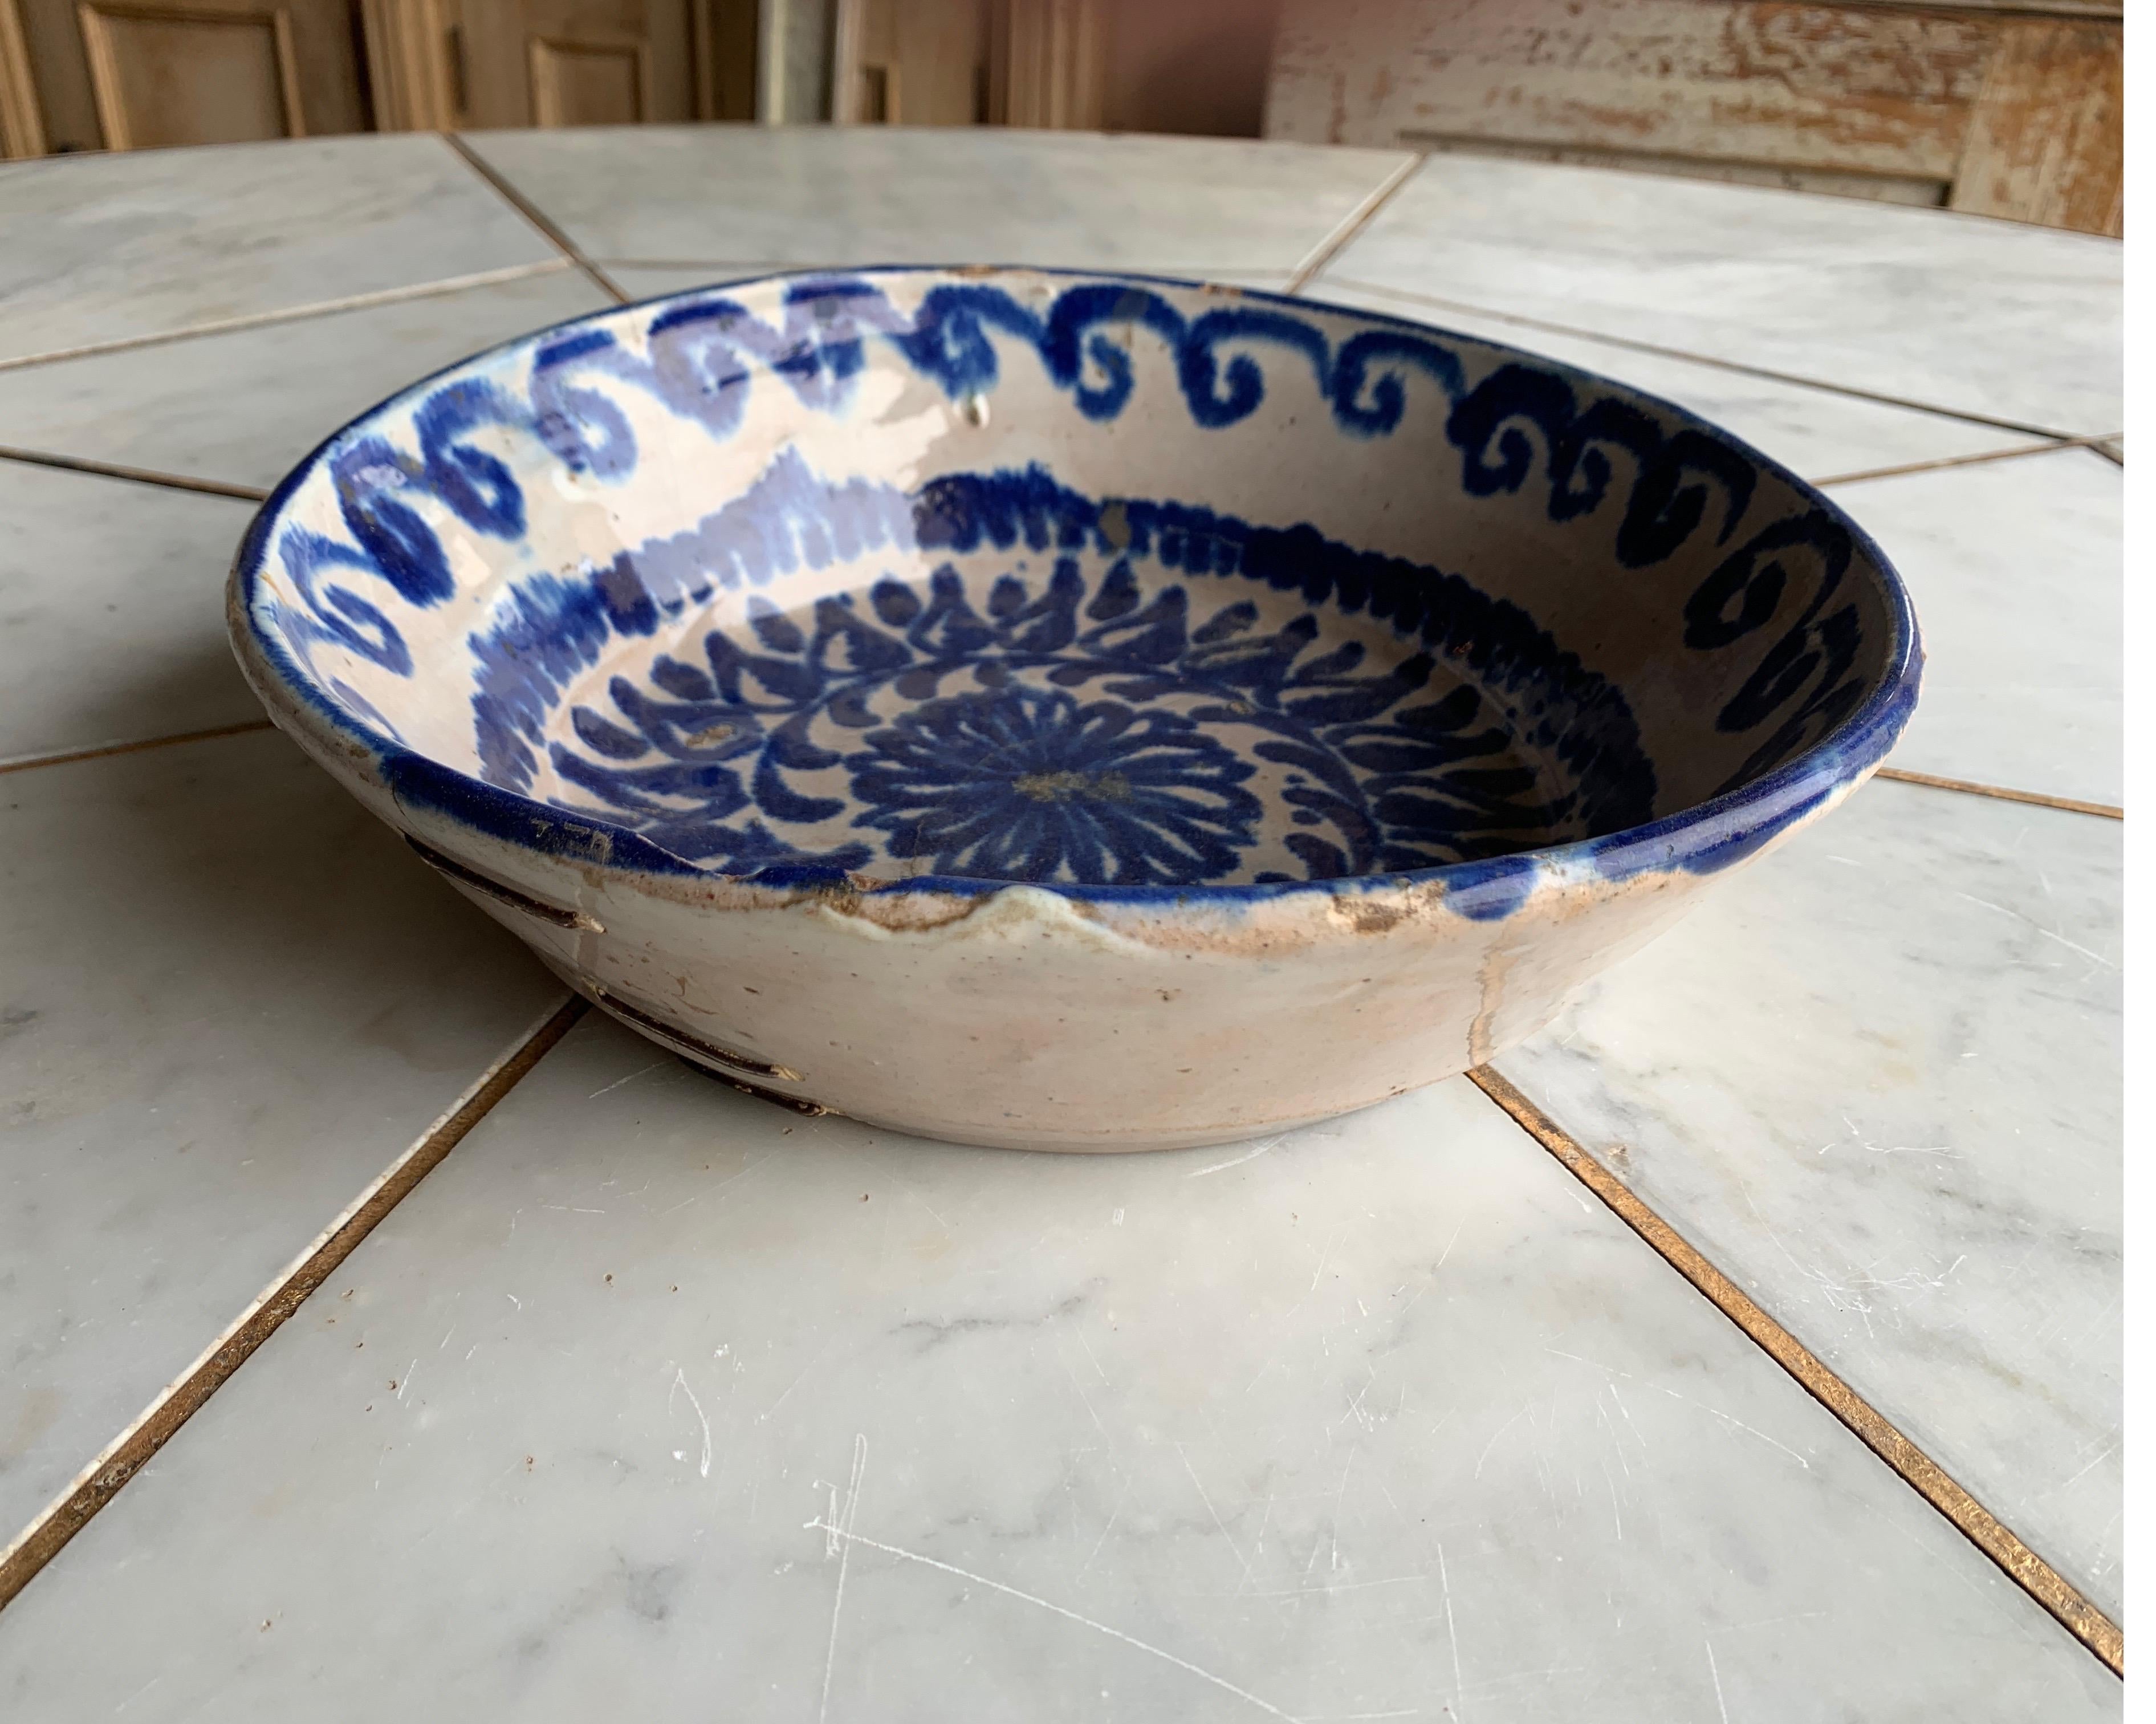 This is a bowl from Spain originating from the Catalonia region. It has old staples to hold hairline crack from splitting further which was common throughout Spain and Europe to mend cracks. It adds tons of character and great for a decorative